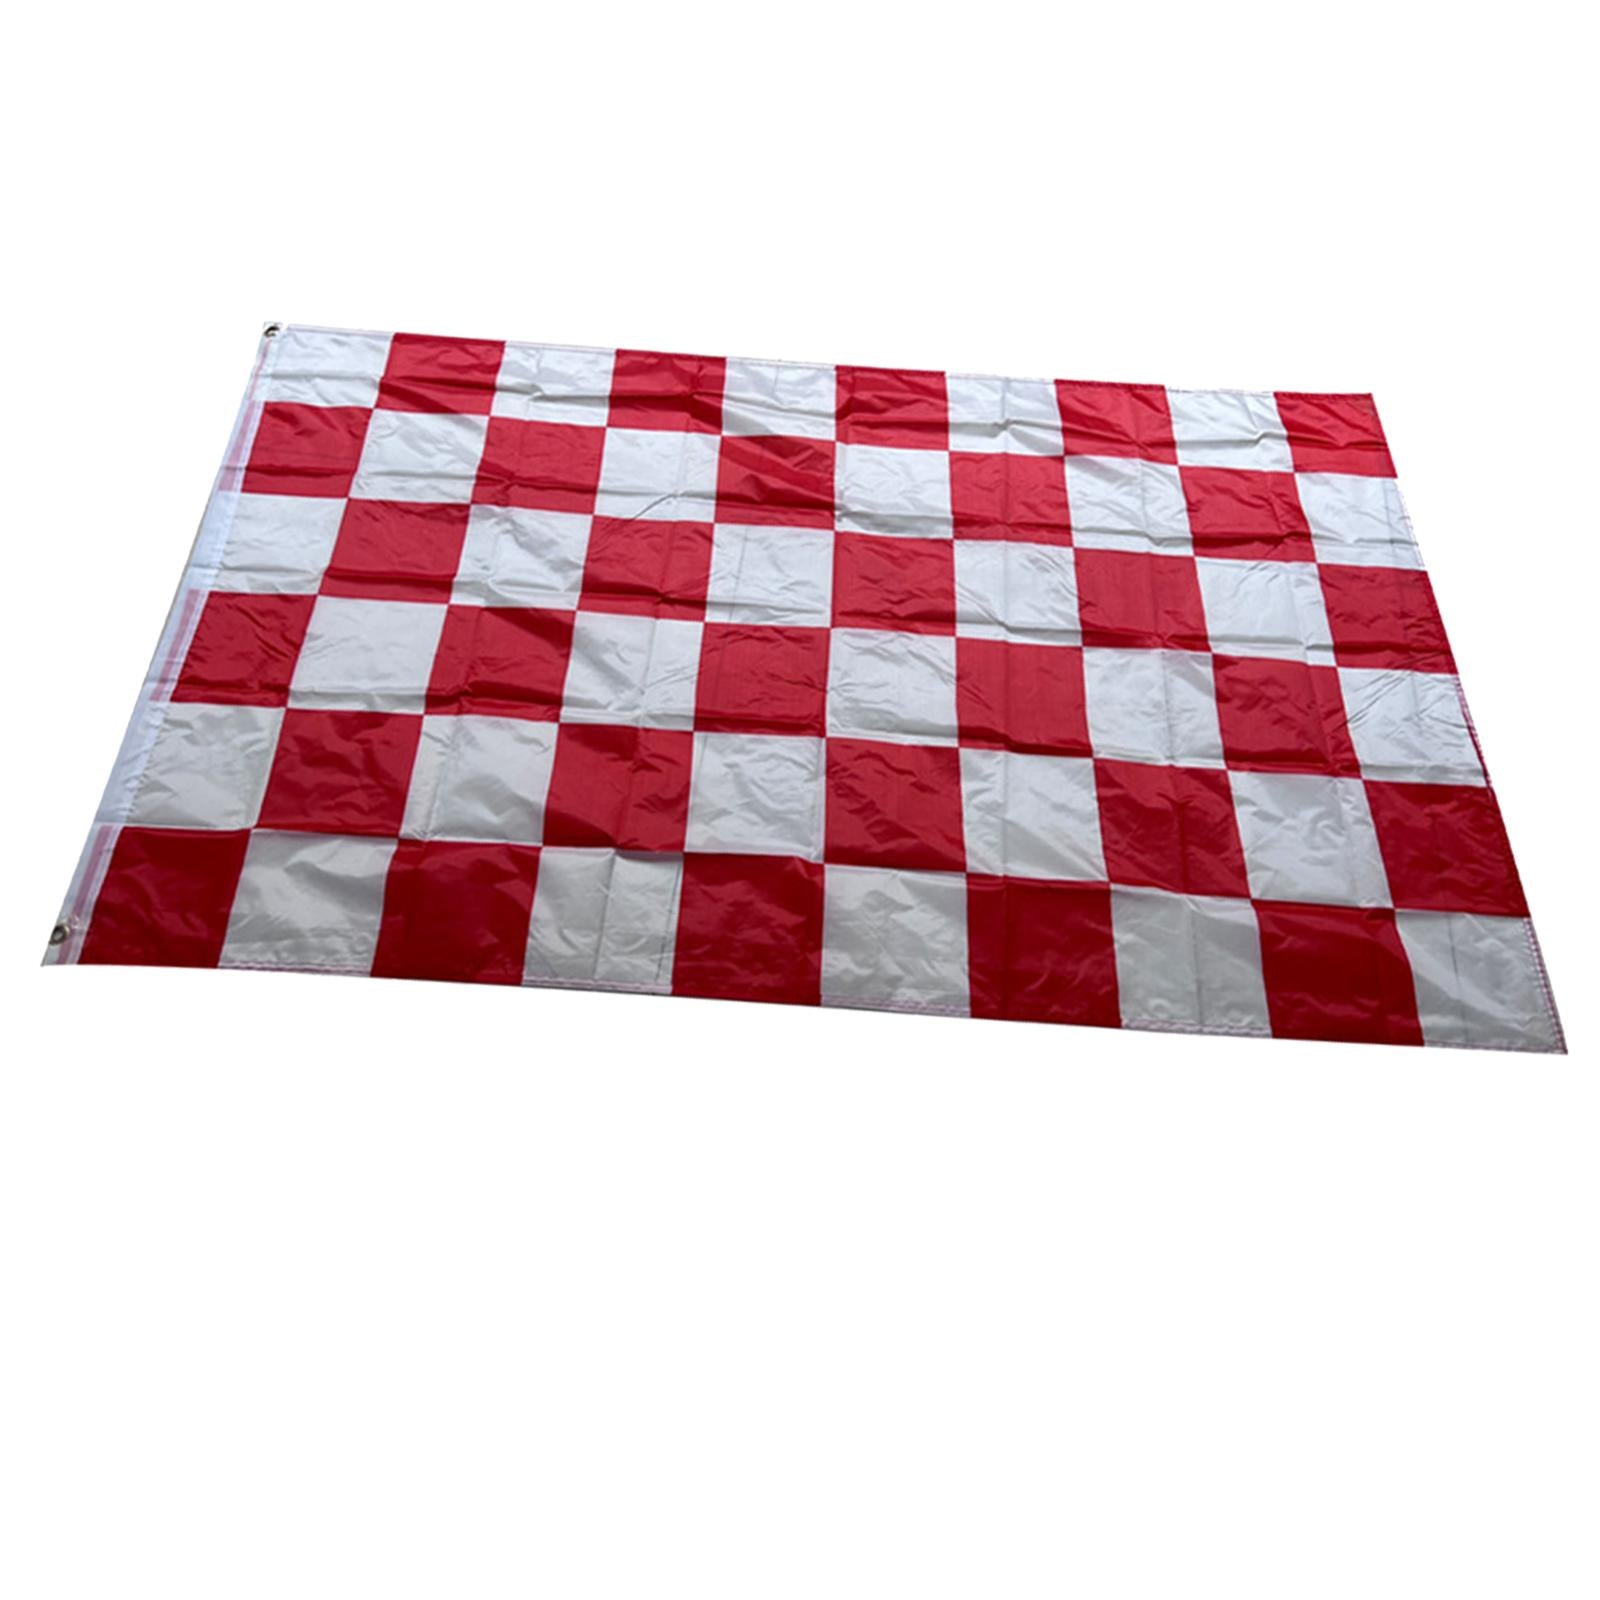 Red and White Check Flag Checkered Flags for Decorating Home Party